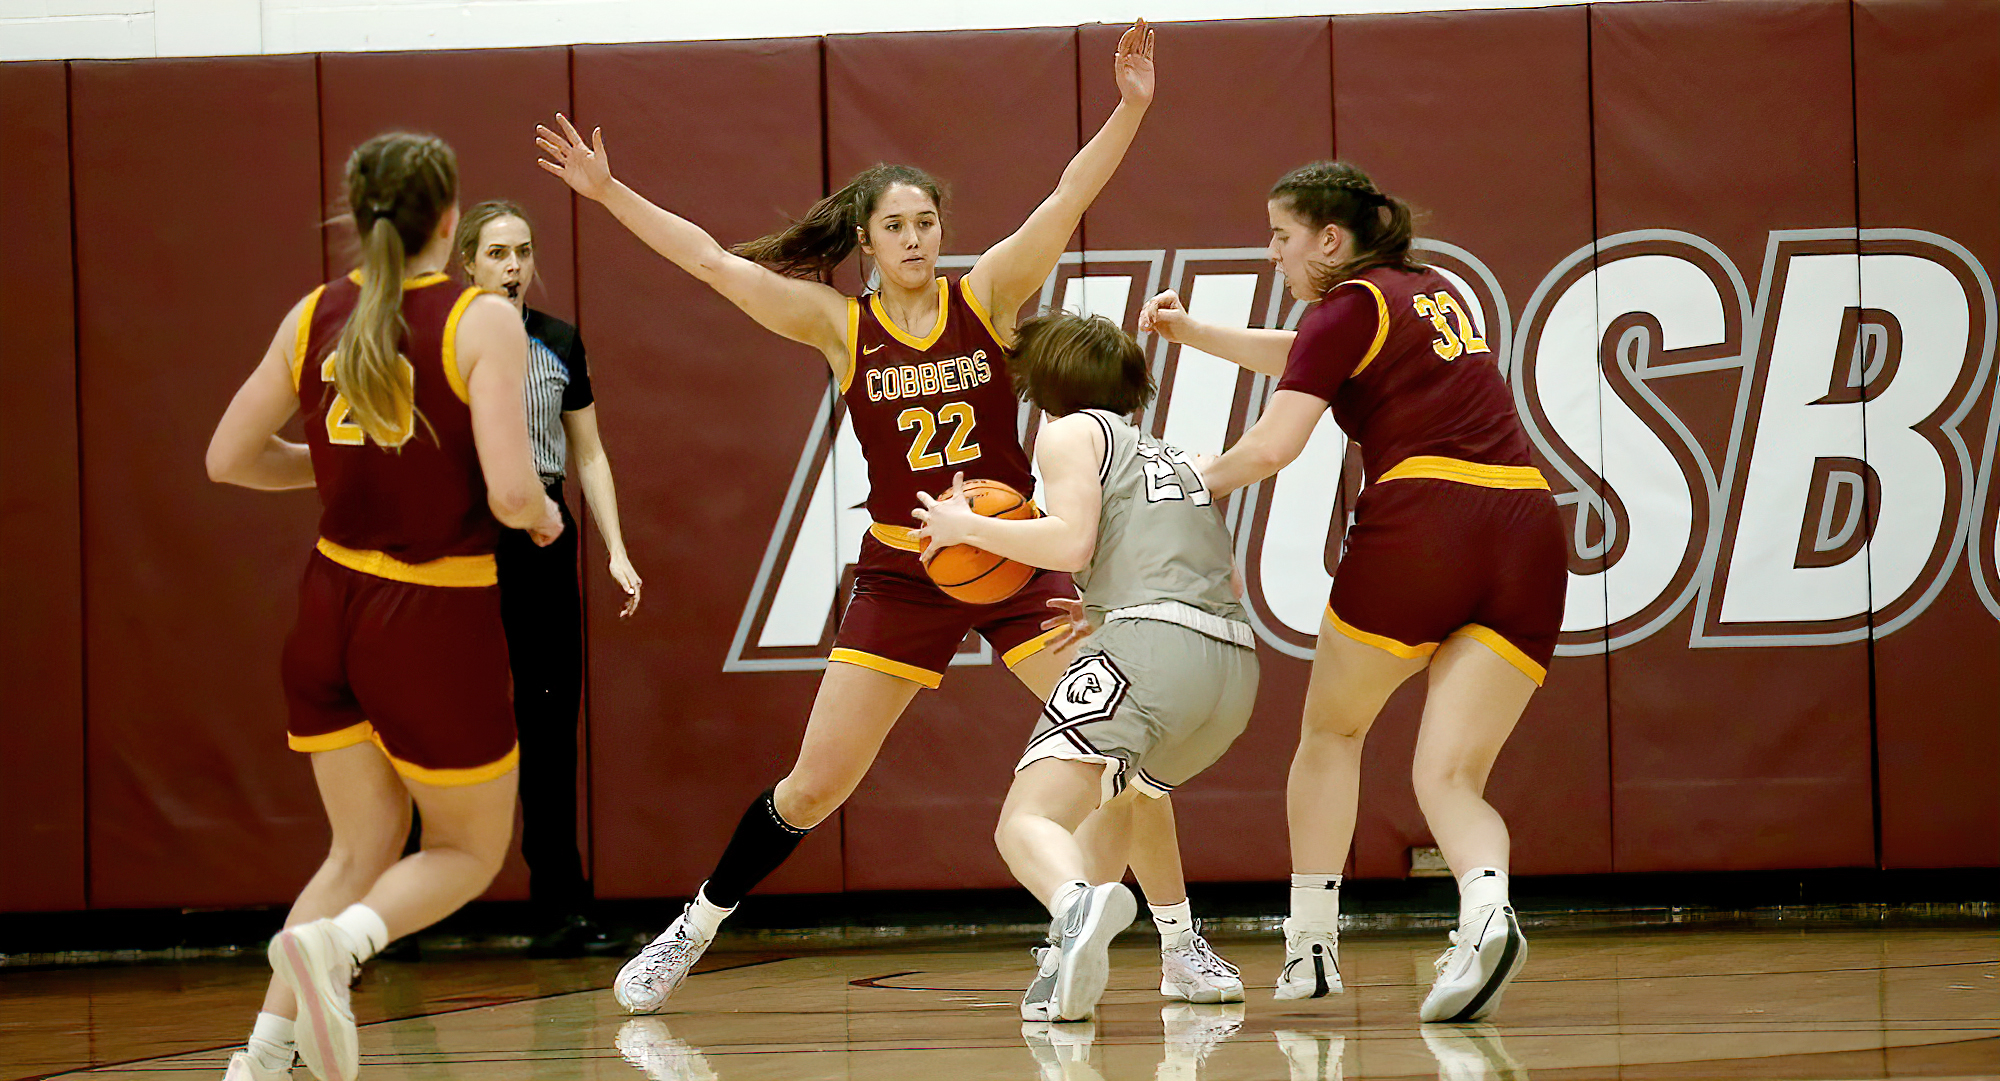 Makayla Anderson (#22) closes off the lane in the Cobbers' win at Augsburg. She had 19 points. (Photo courtesy of Ryan Coleman, D3photography)